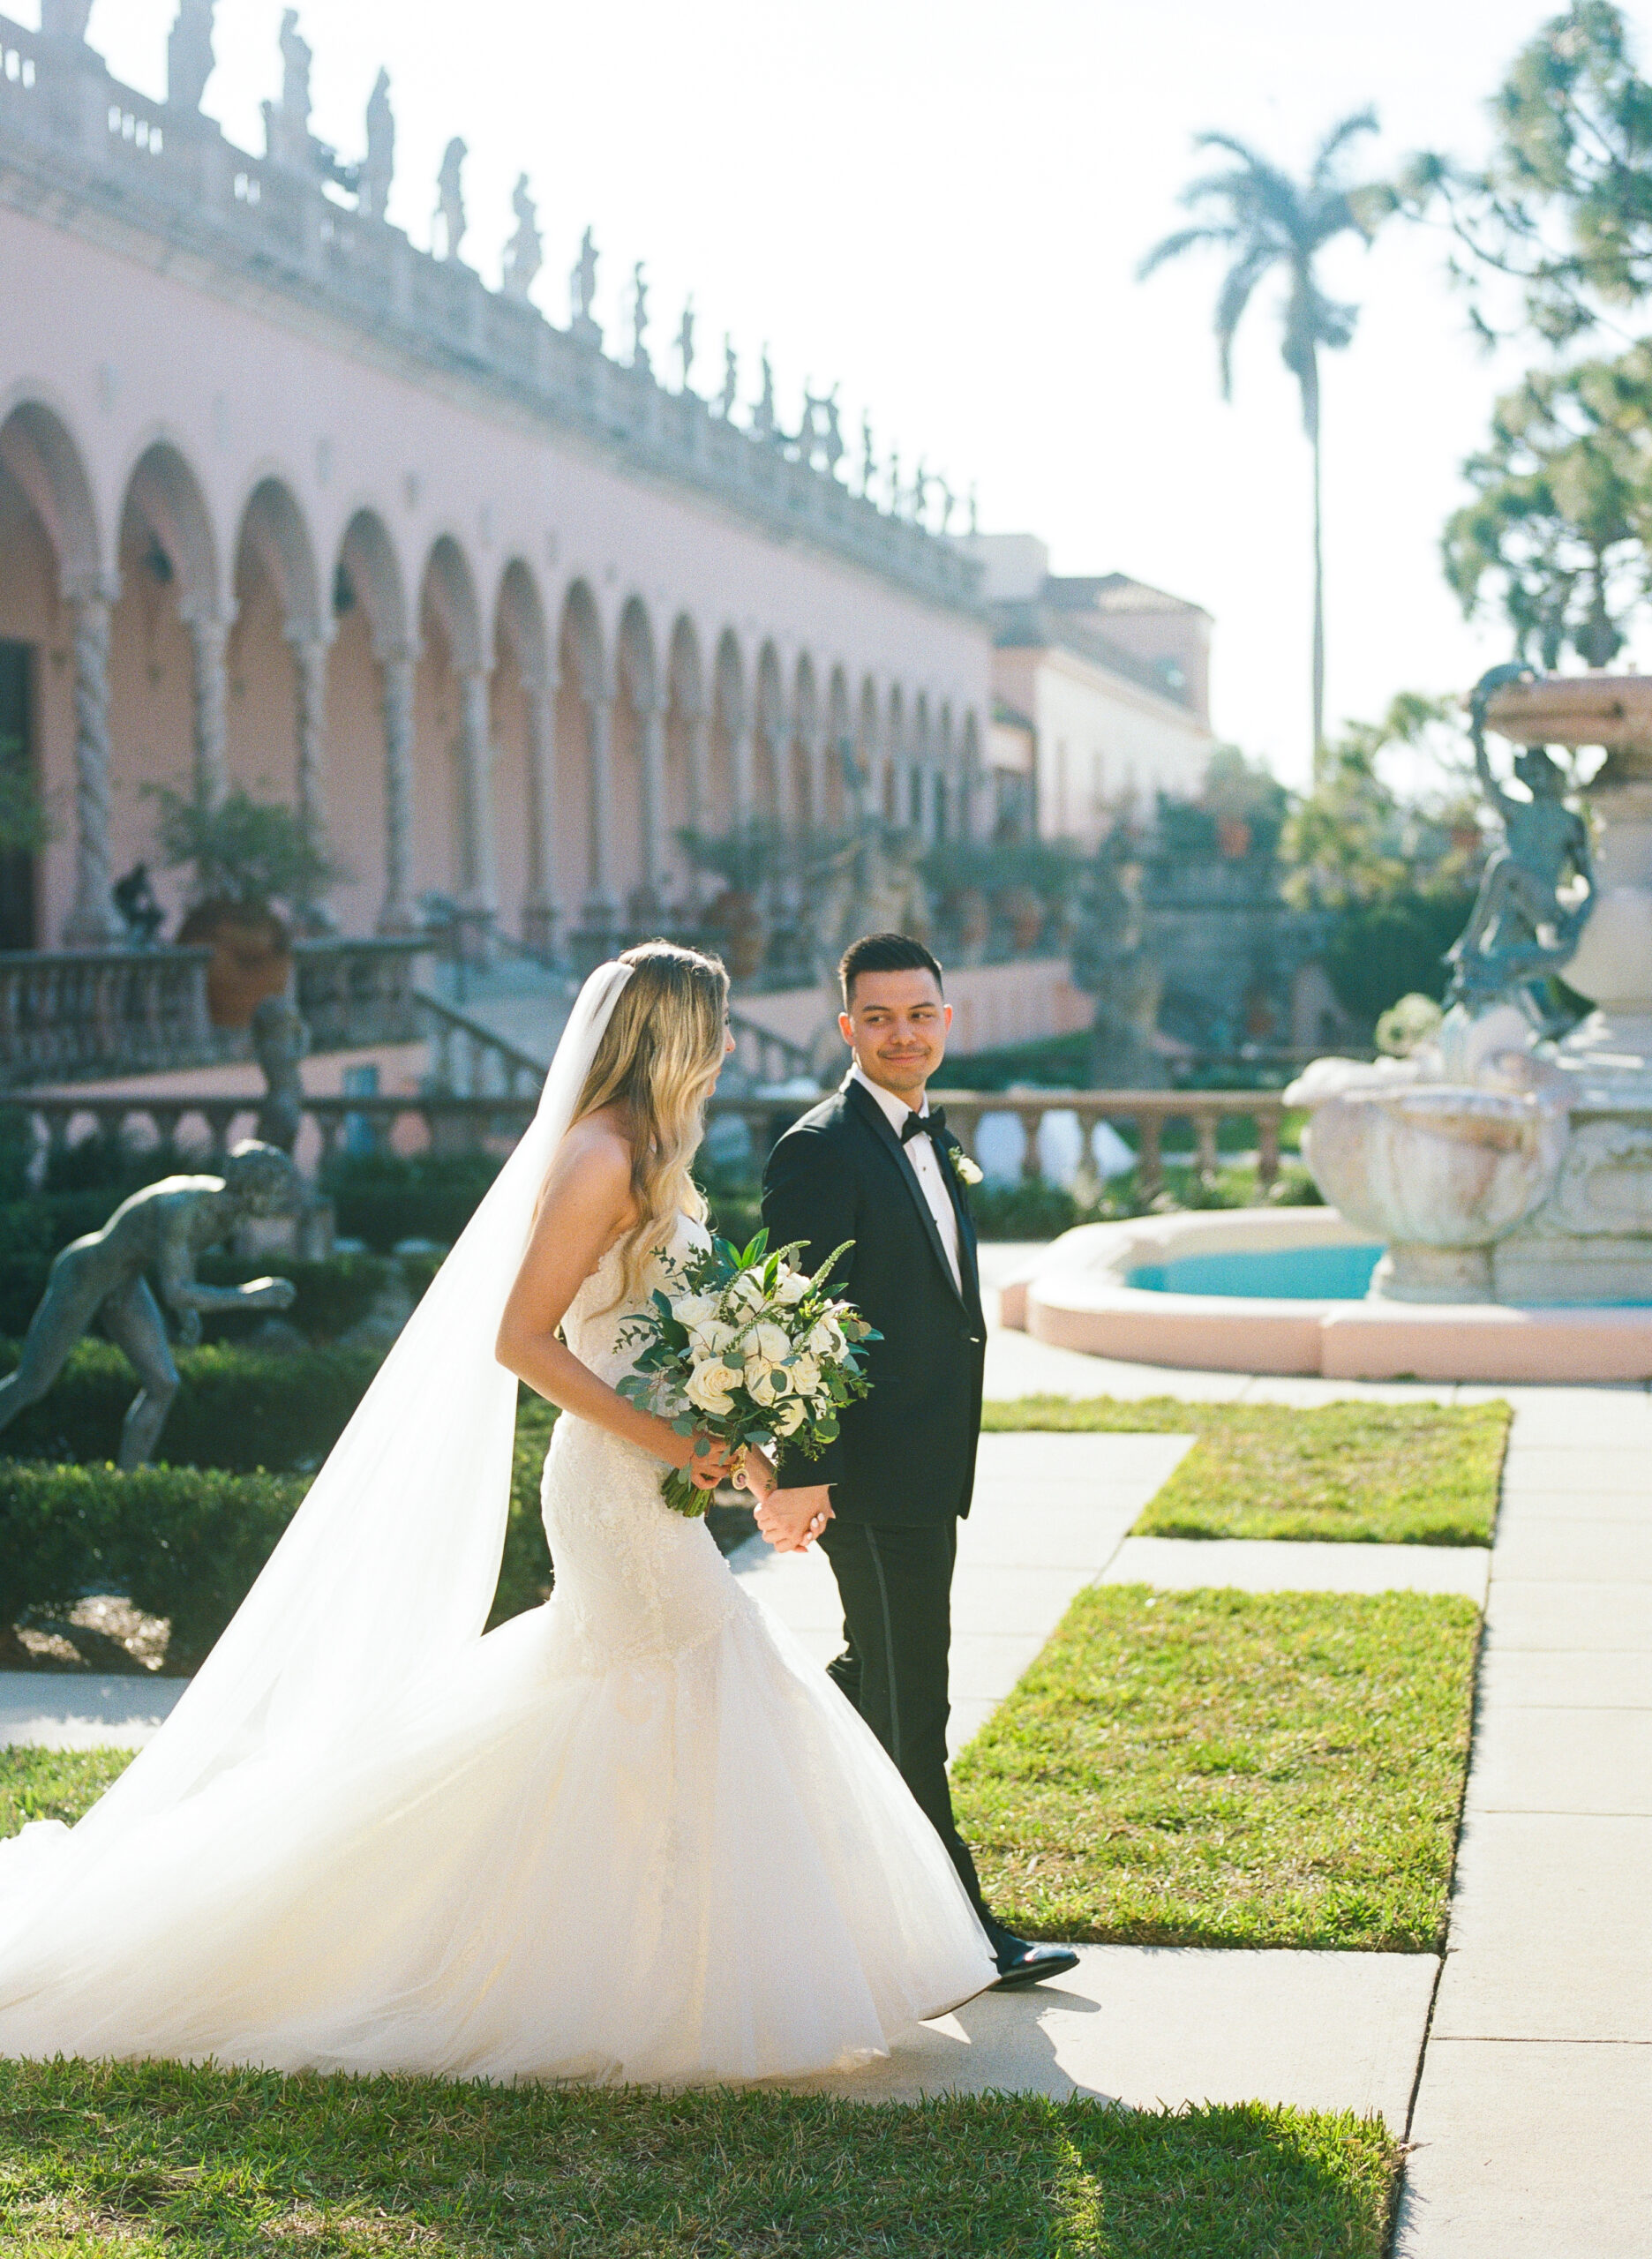 John and mable ringling museum of art wedding photos 